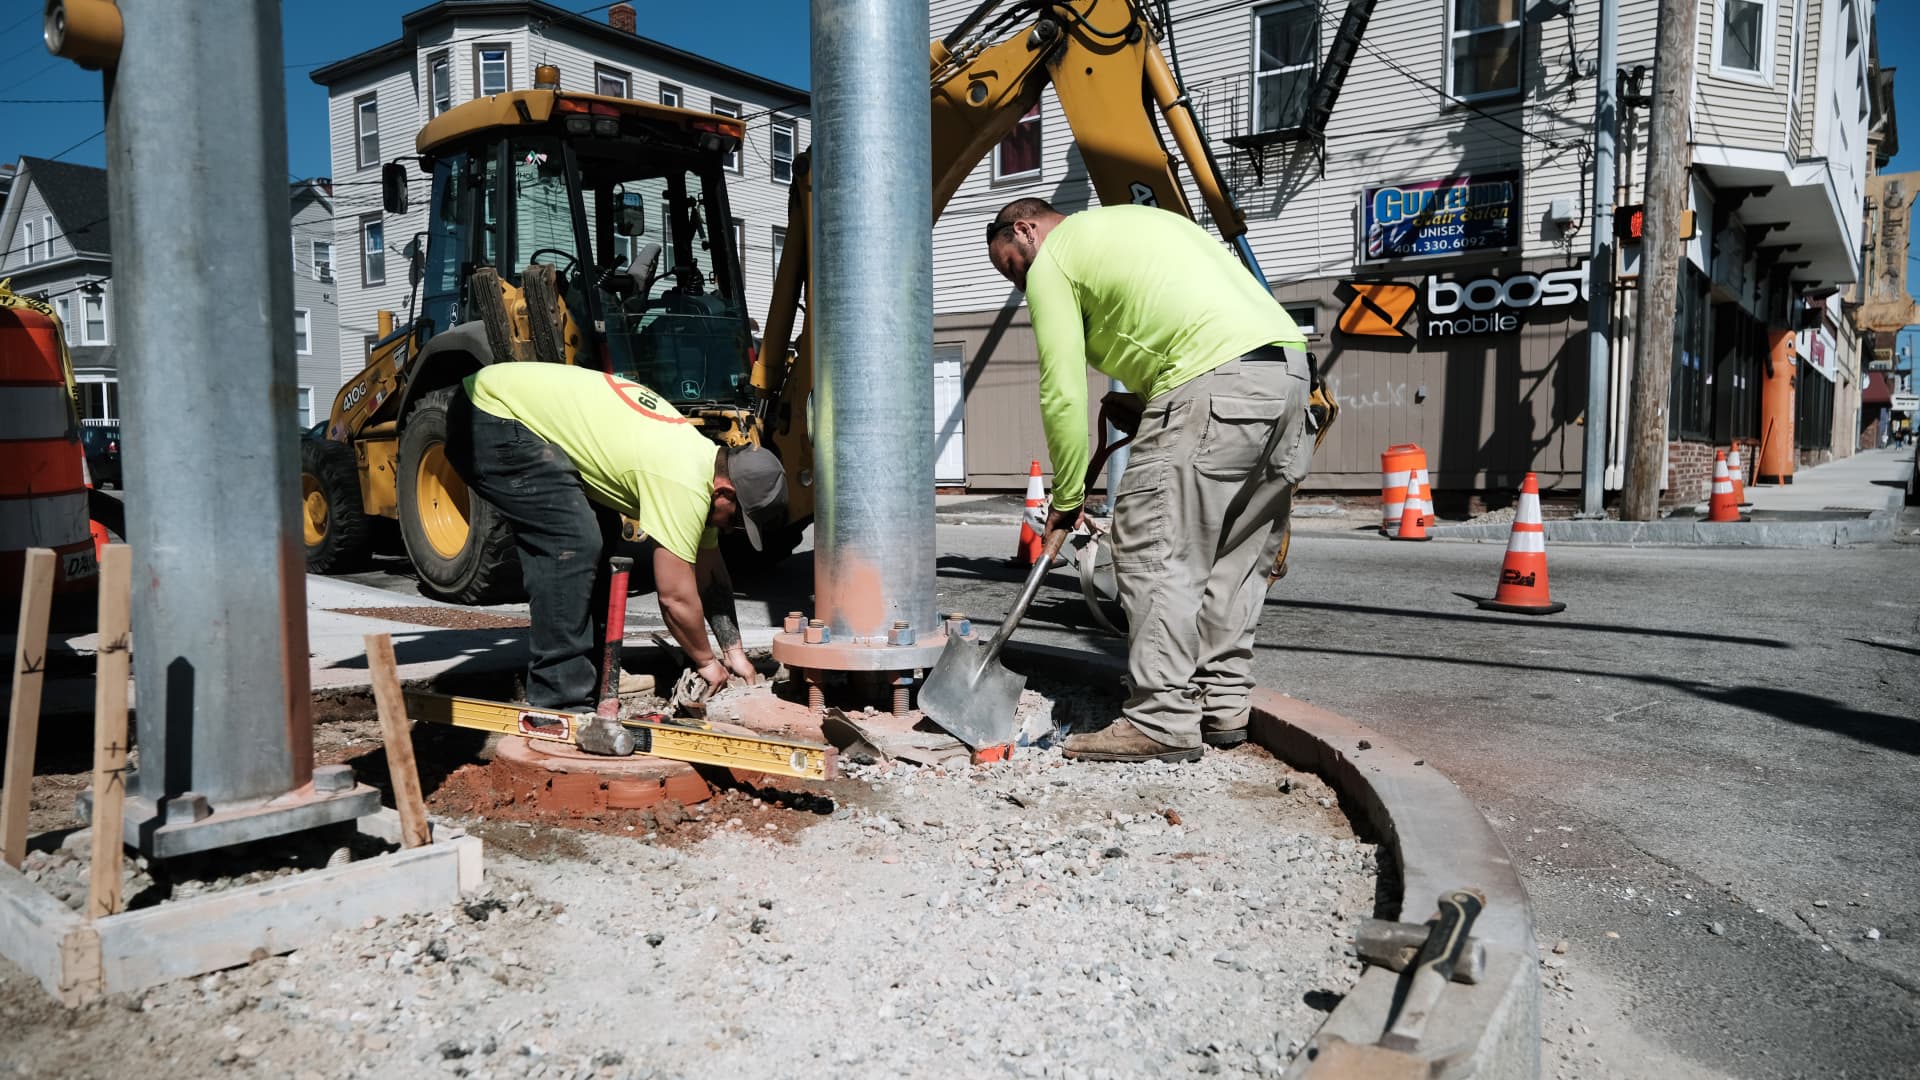 Men work on a construction project on April 09, 2021 in Central Falls, Rhode Island.